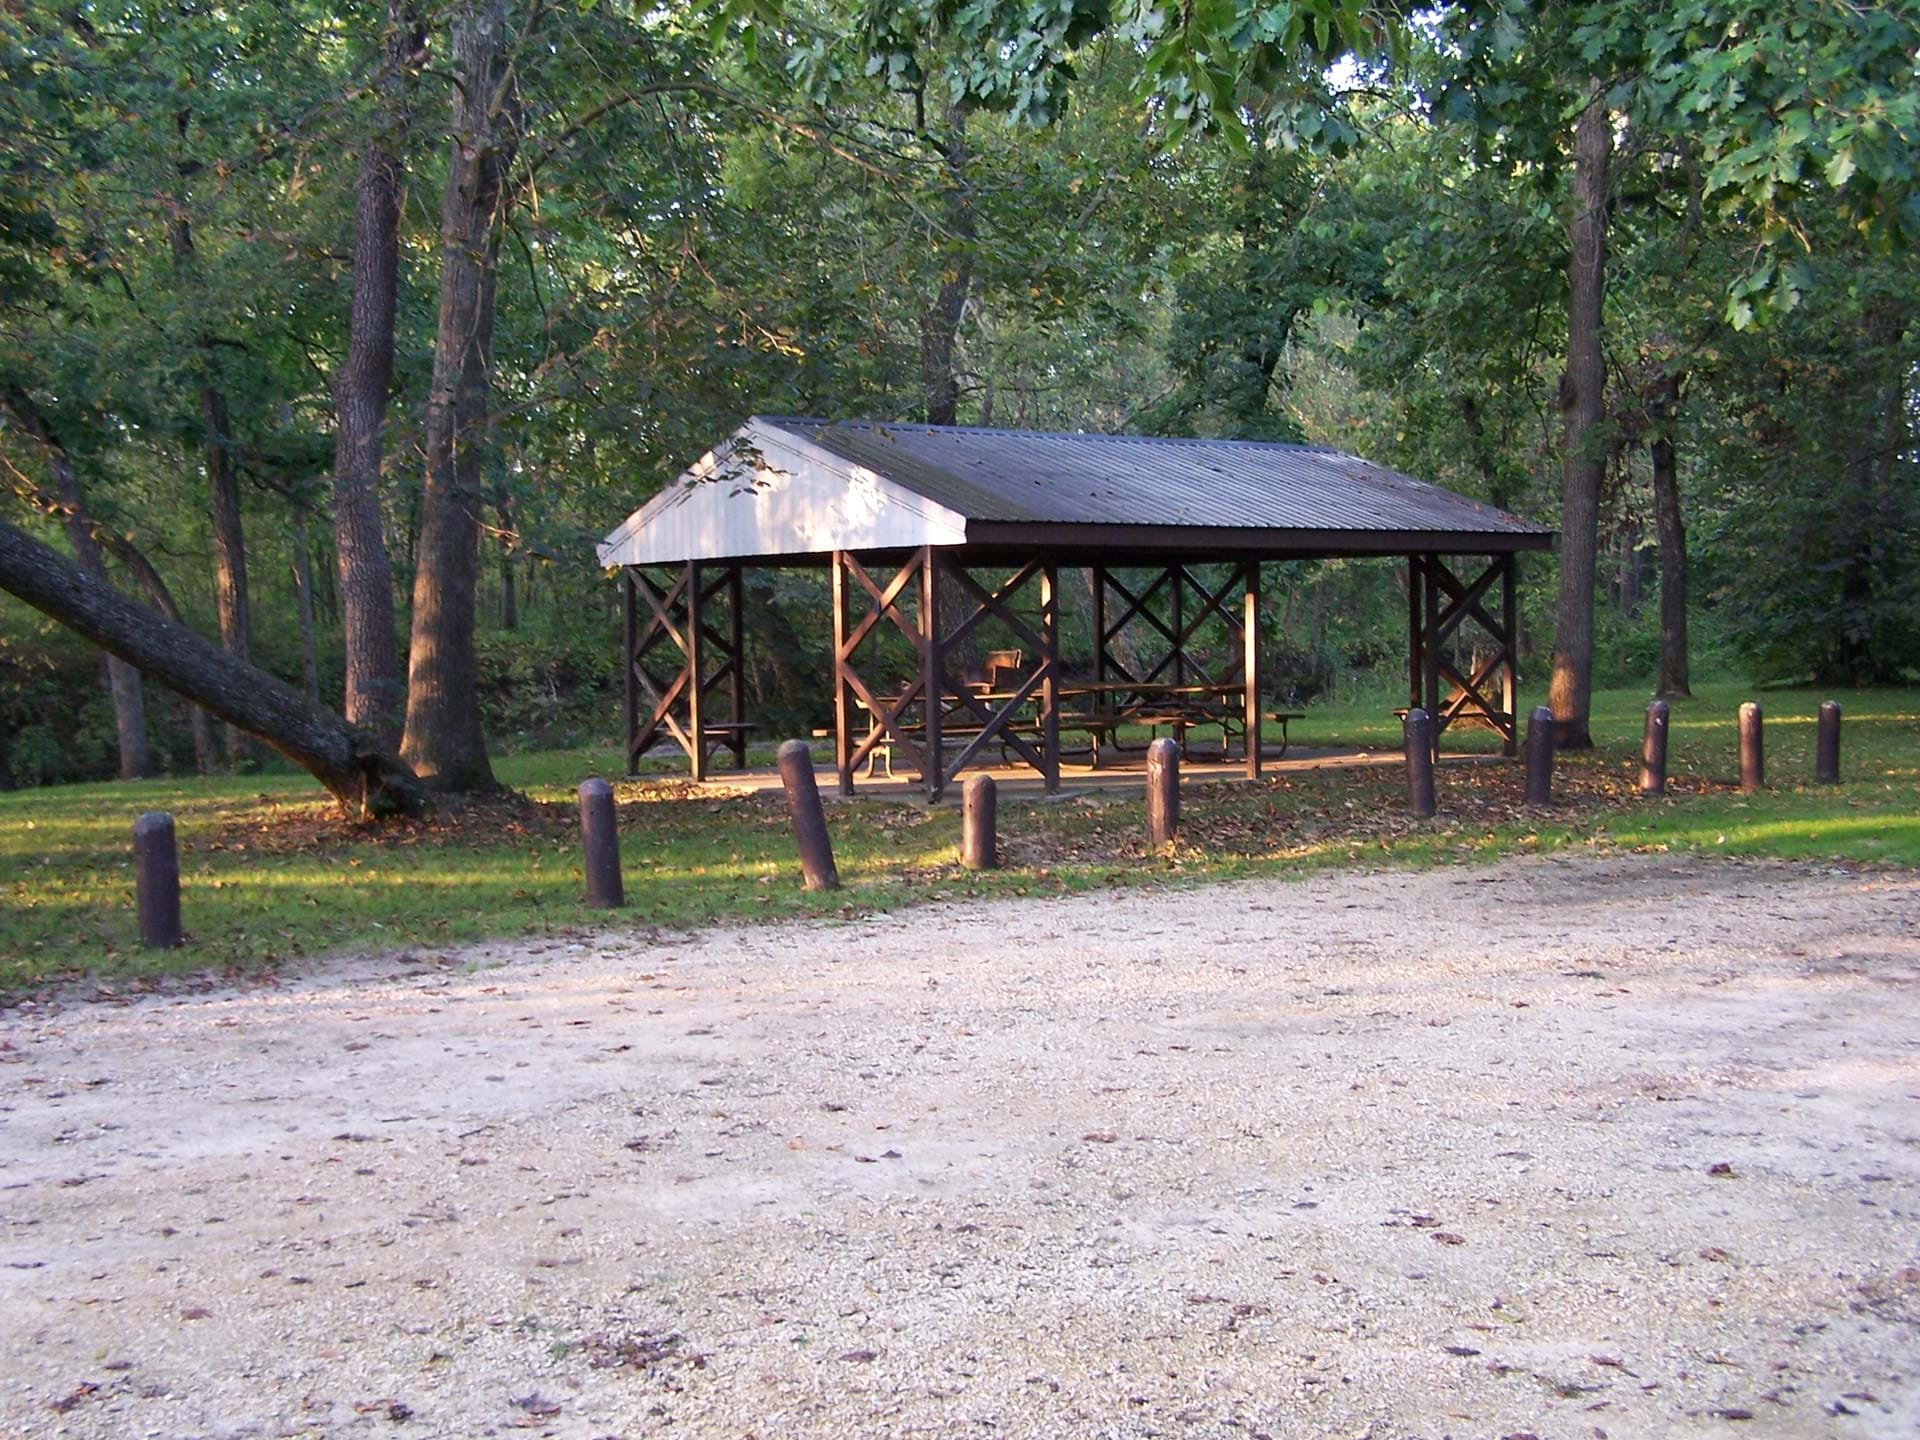 The picnic shelter at Ludwig Park